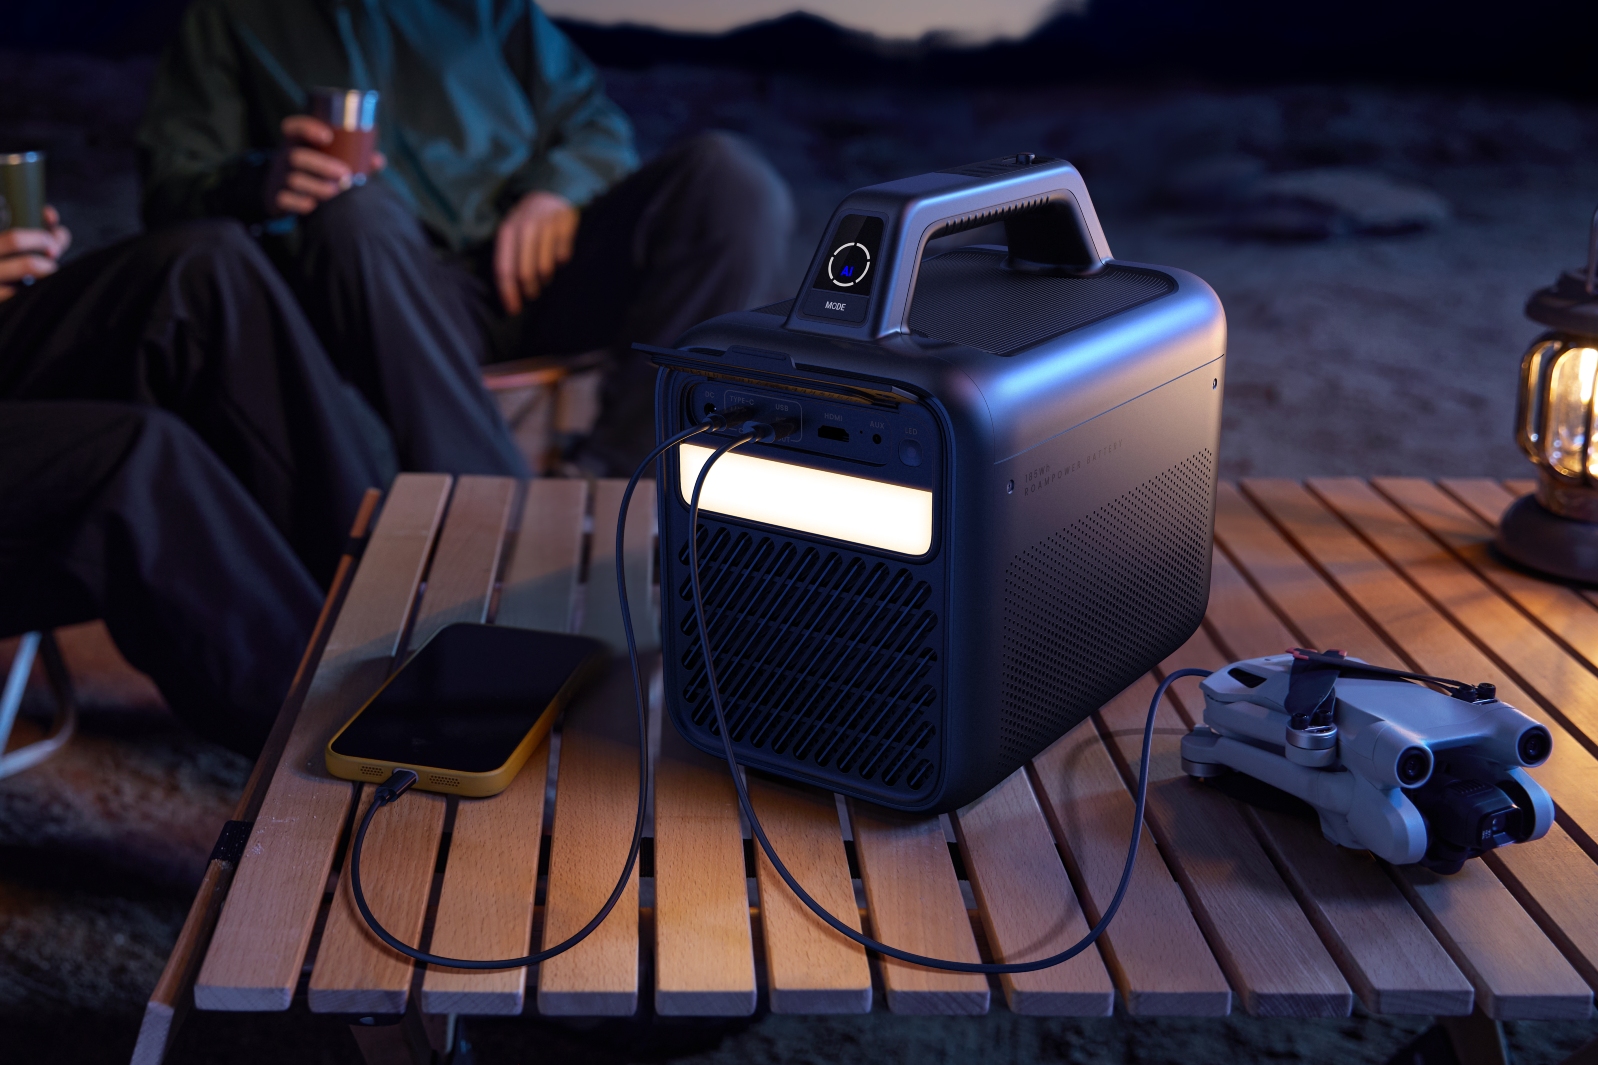 Review: Is Anker's Nebula Solar Portable Projector Worth the Money?